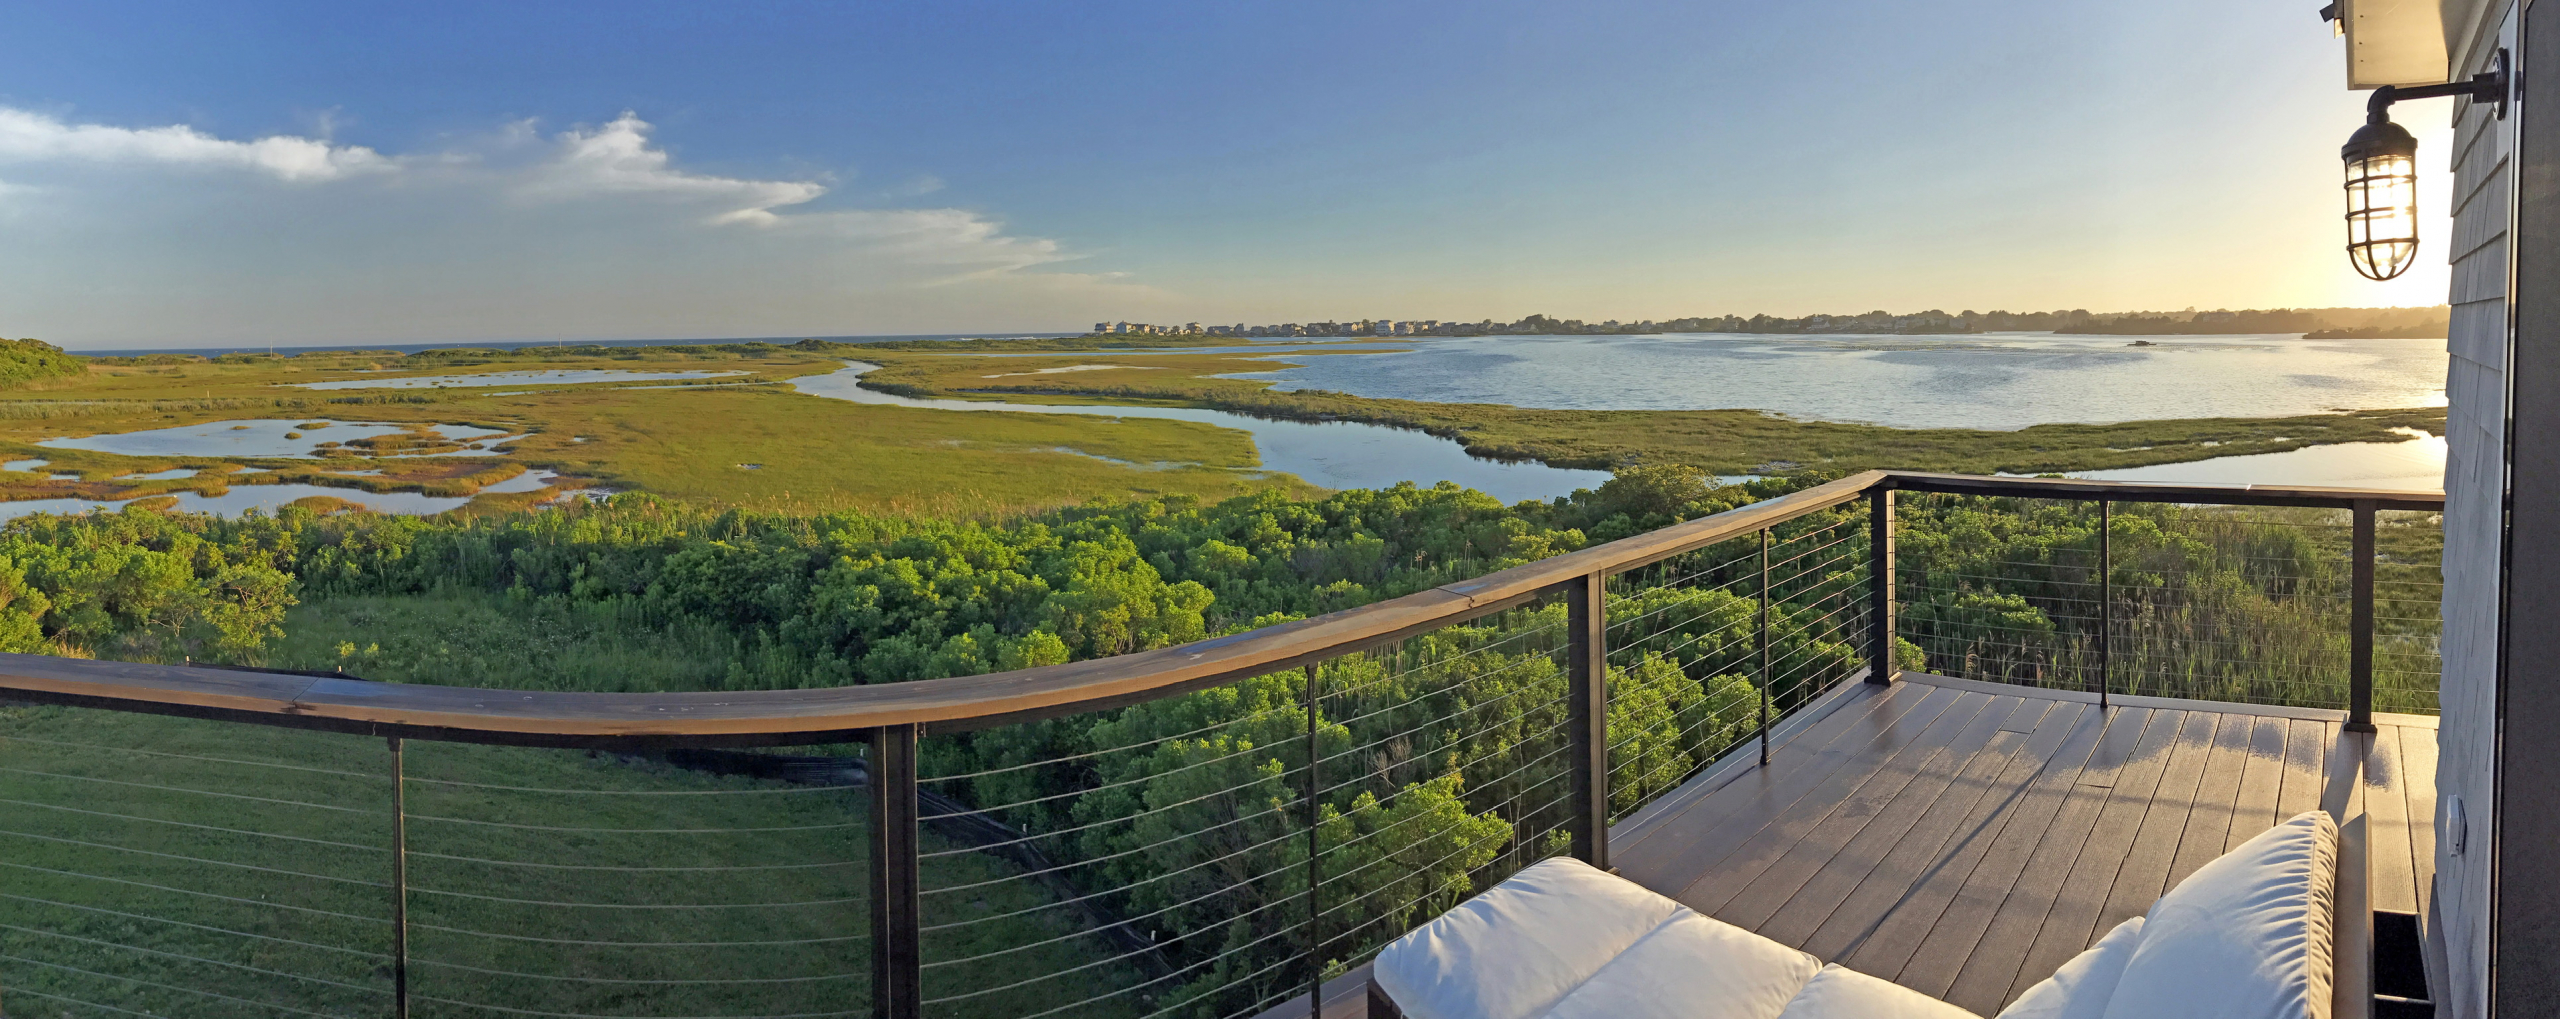 GREGORY ARAKELIAN OF LILA DELMAN SETS RECORD FOR HIGHEST CONDO SALE IN SOUTH KINGSTOWN’S HISTORY*